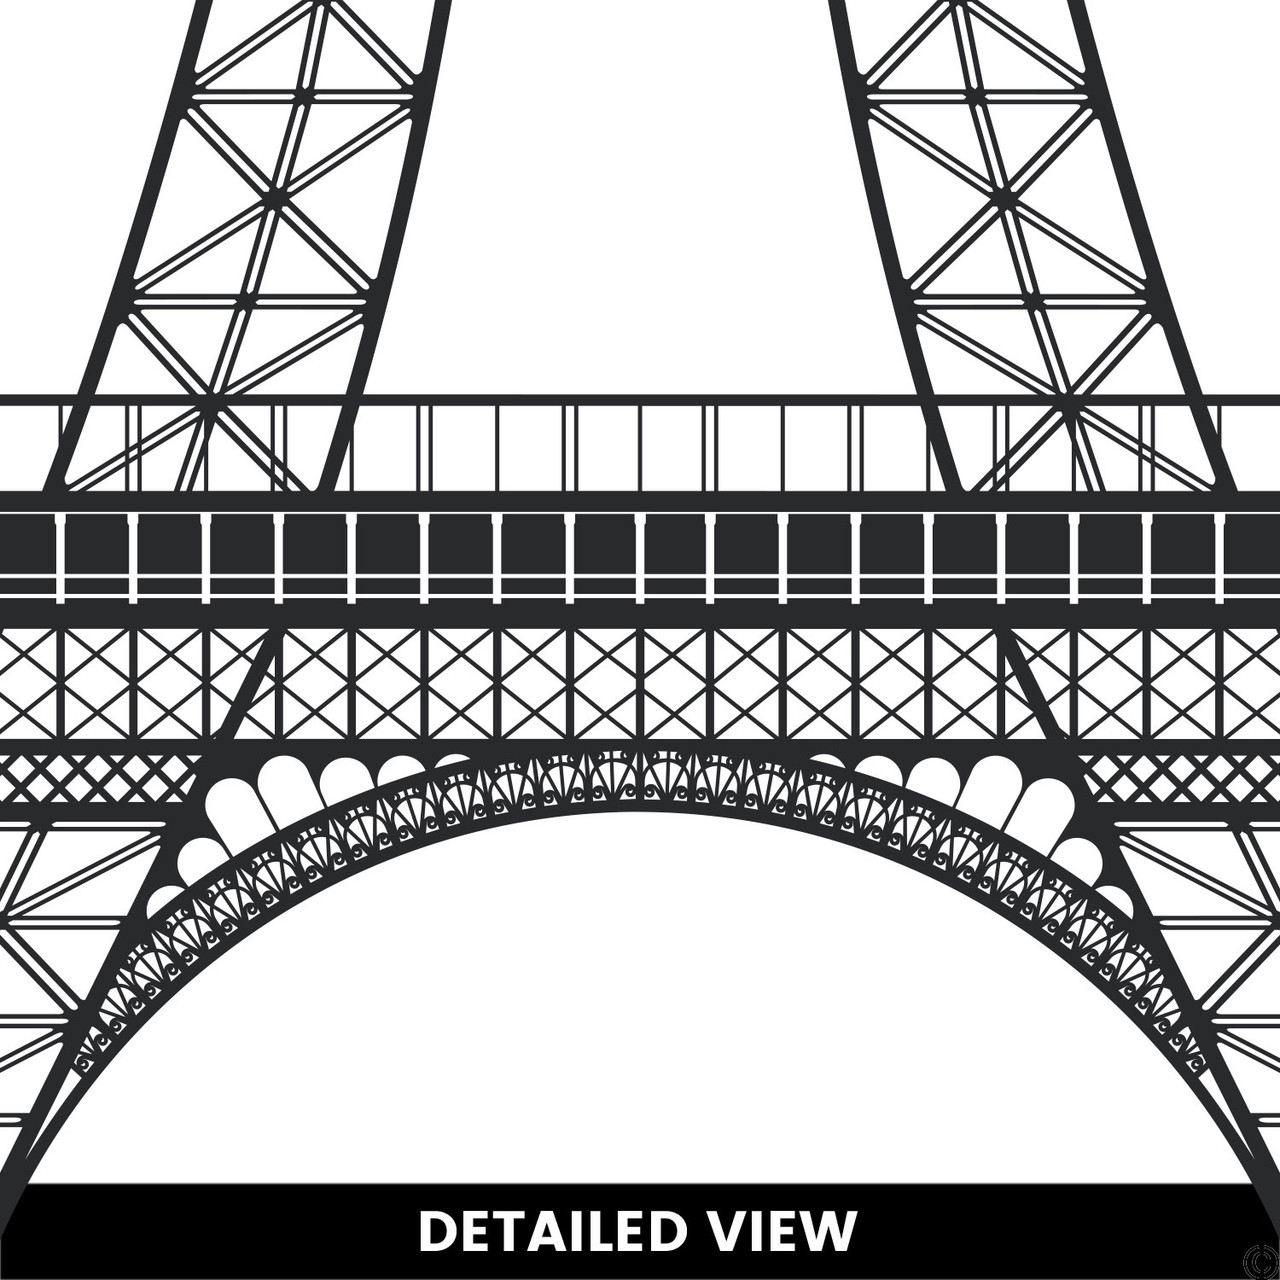 A close up view of the Eiffel Tower wall decal shown here in black color.